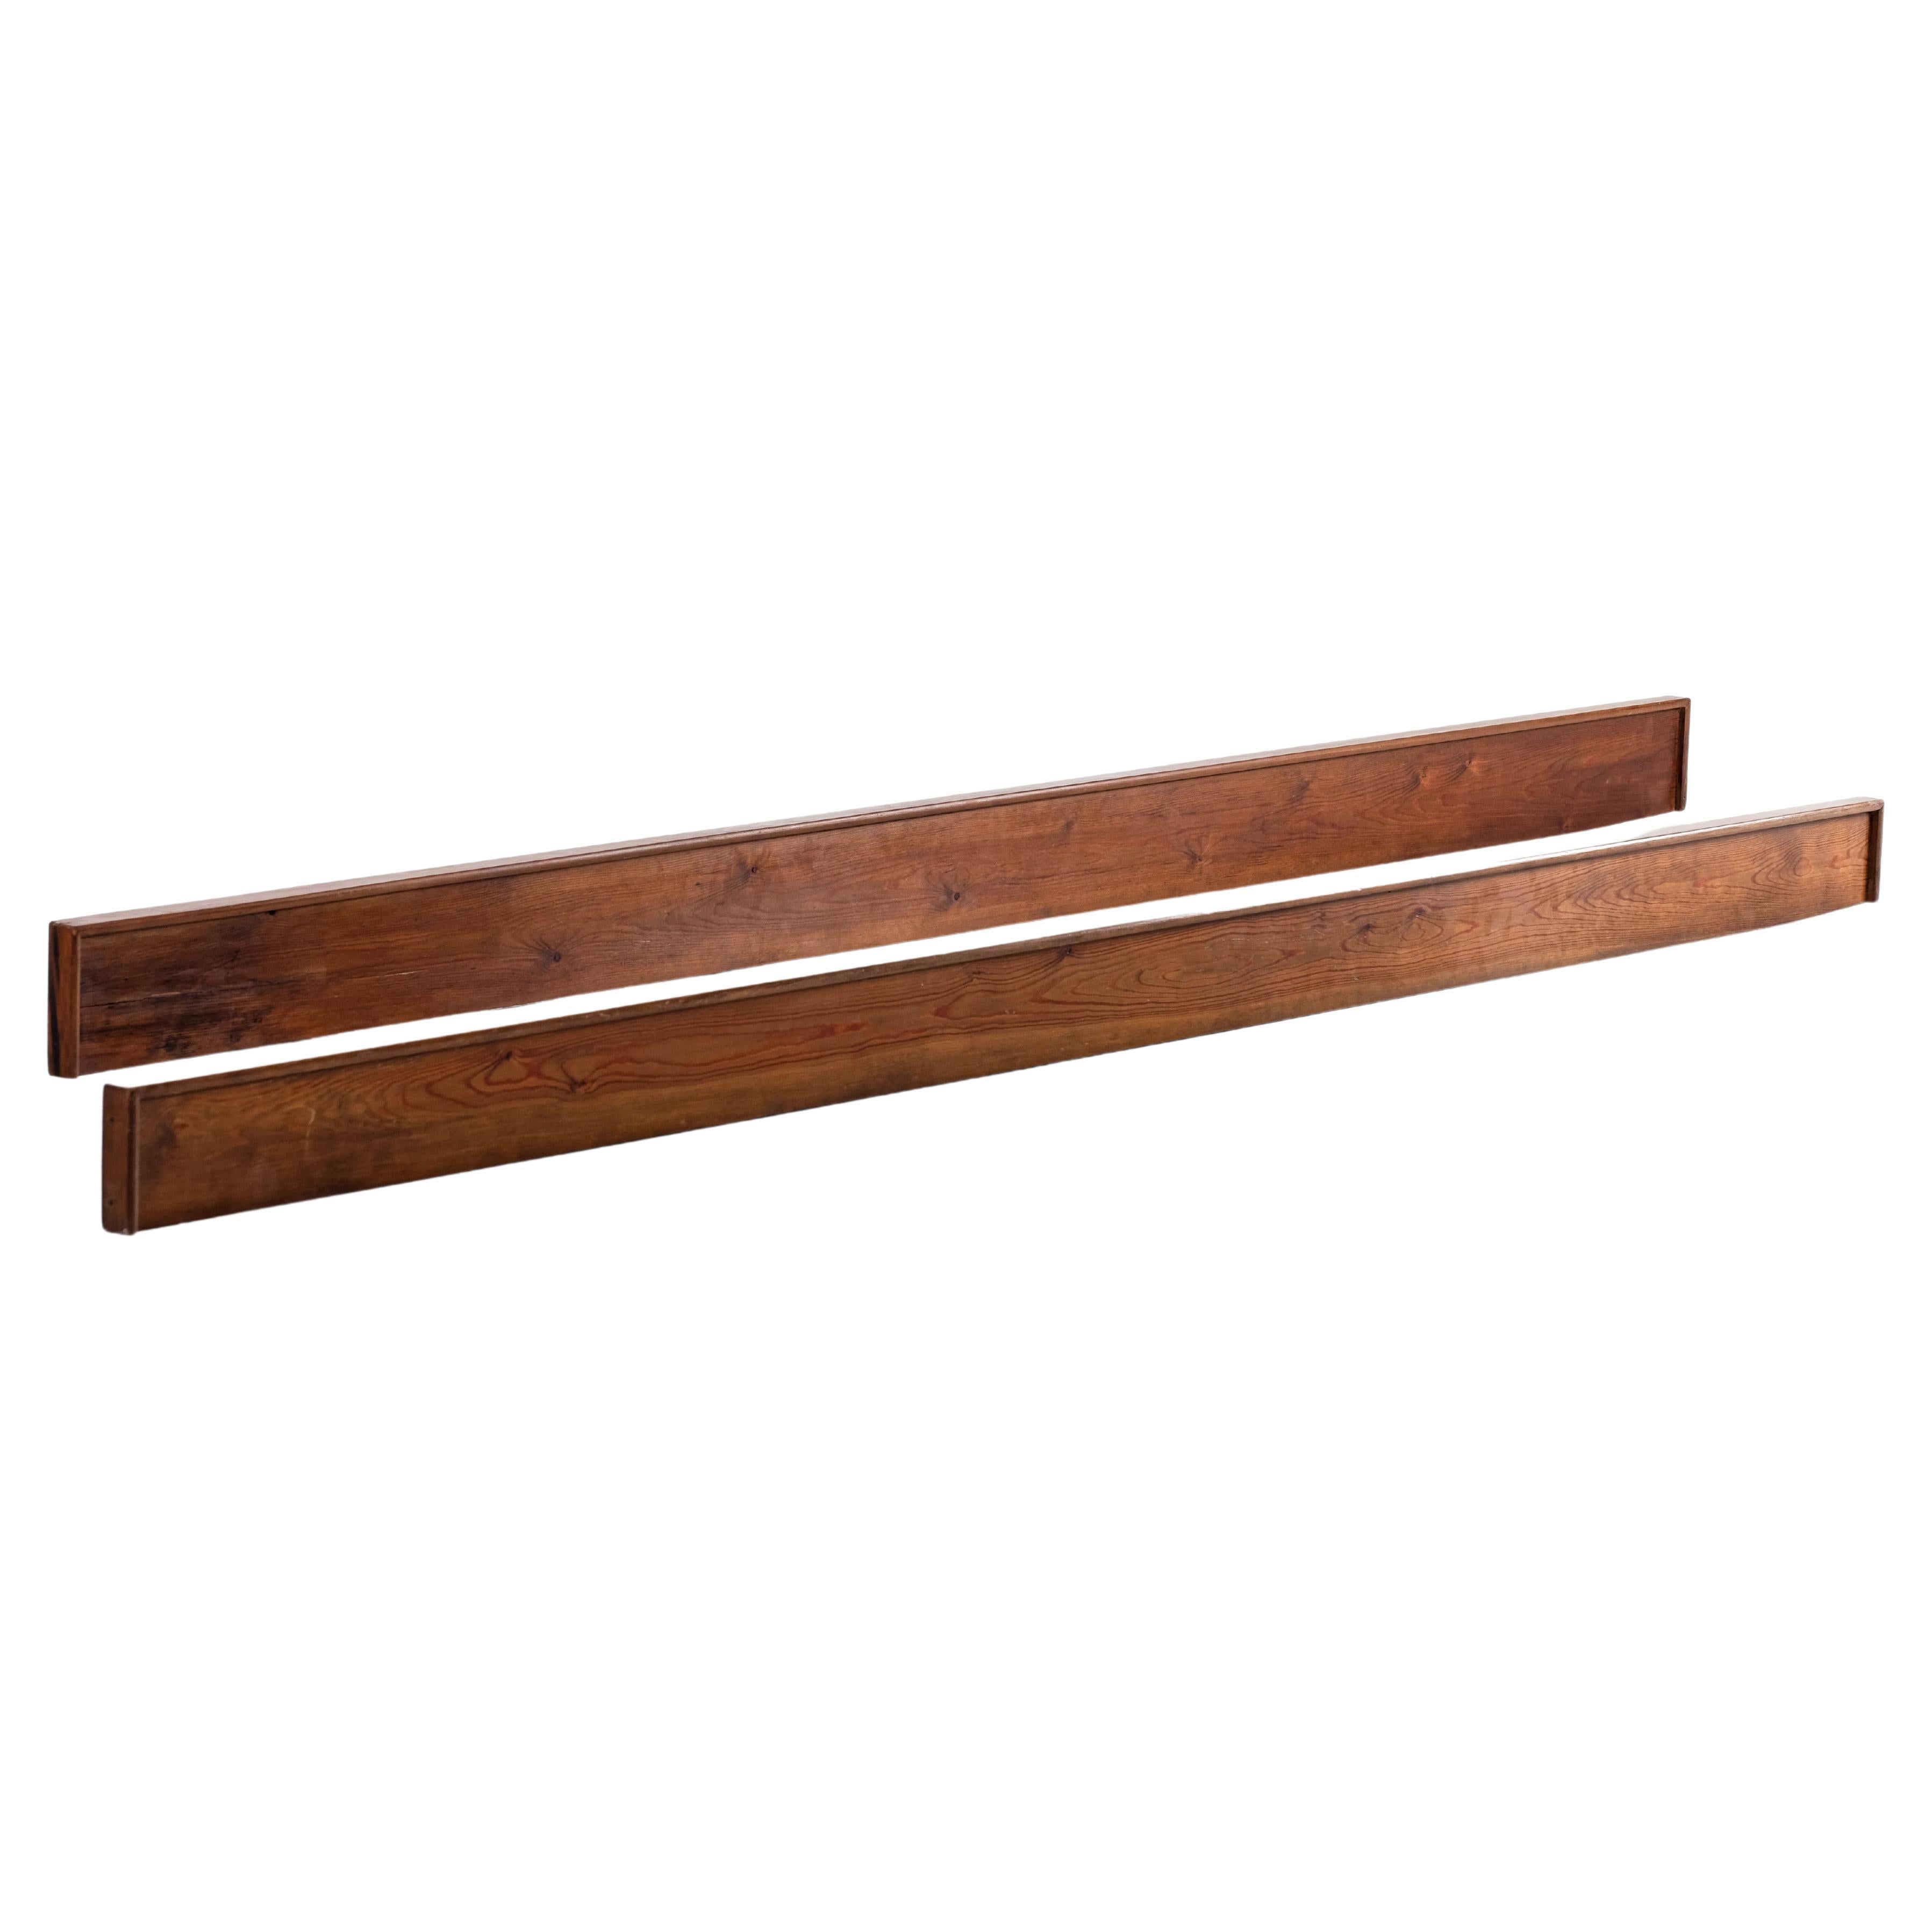 Mid-20th Century Rare pair of pine wall shelves, Sweden, 1930s For Sale